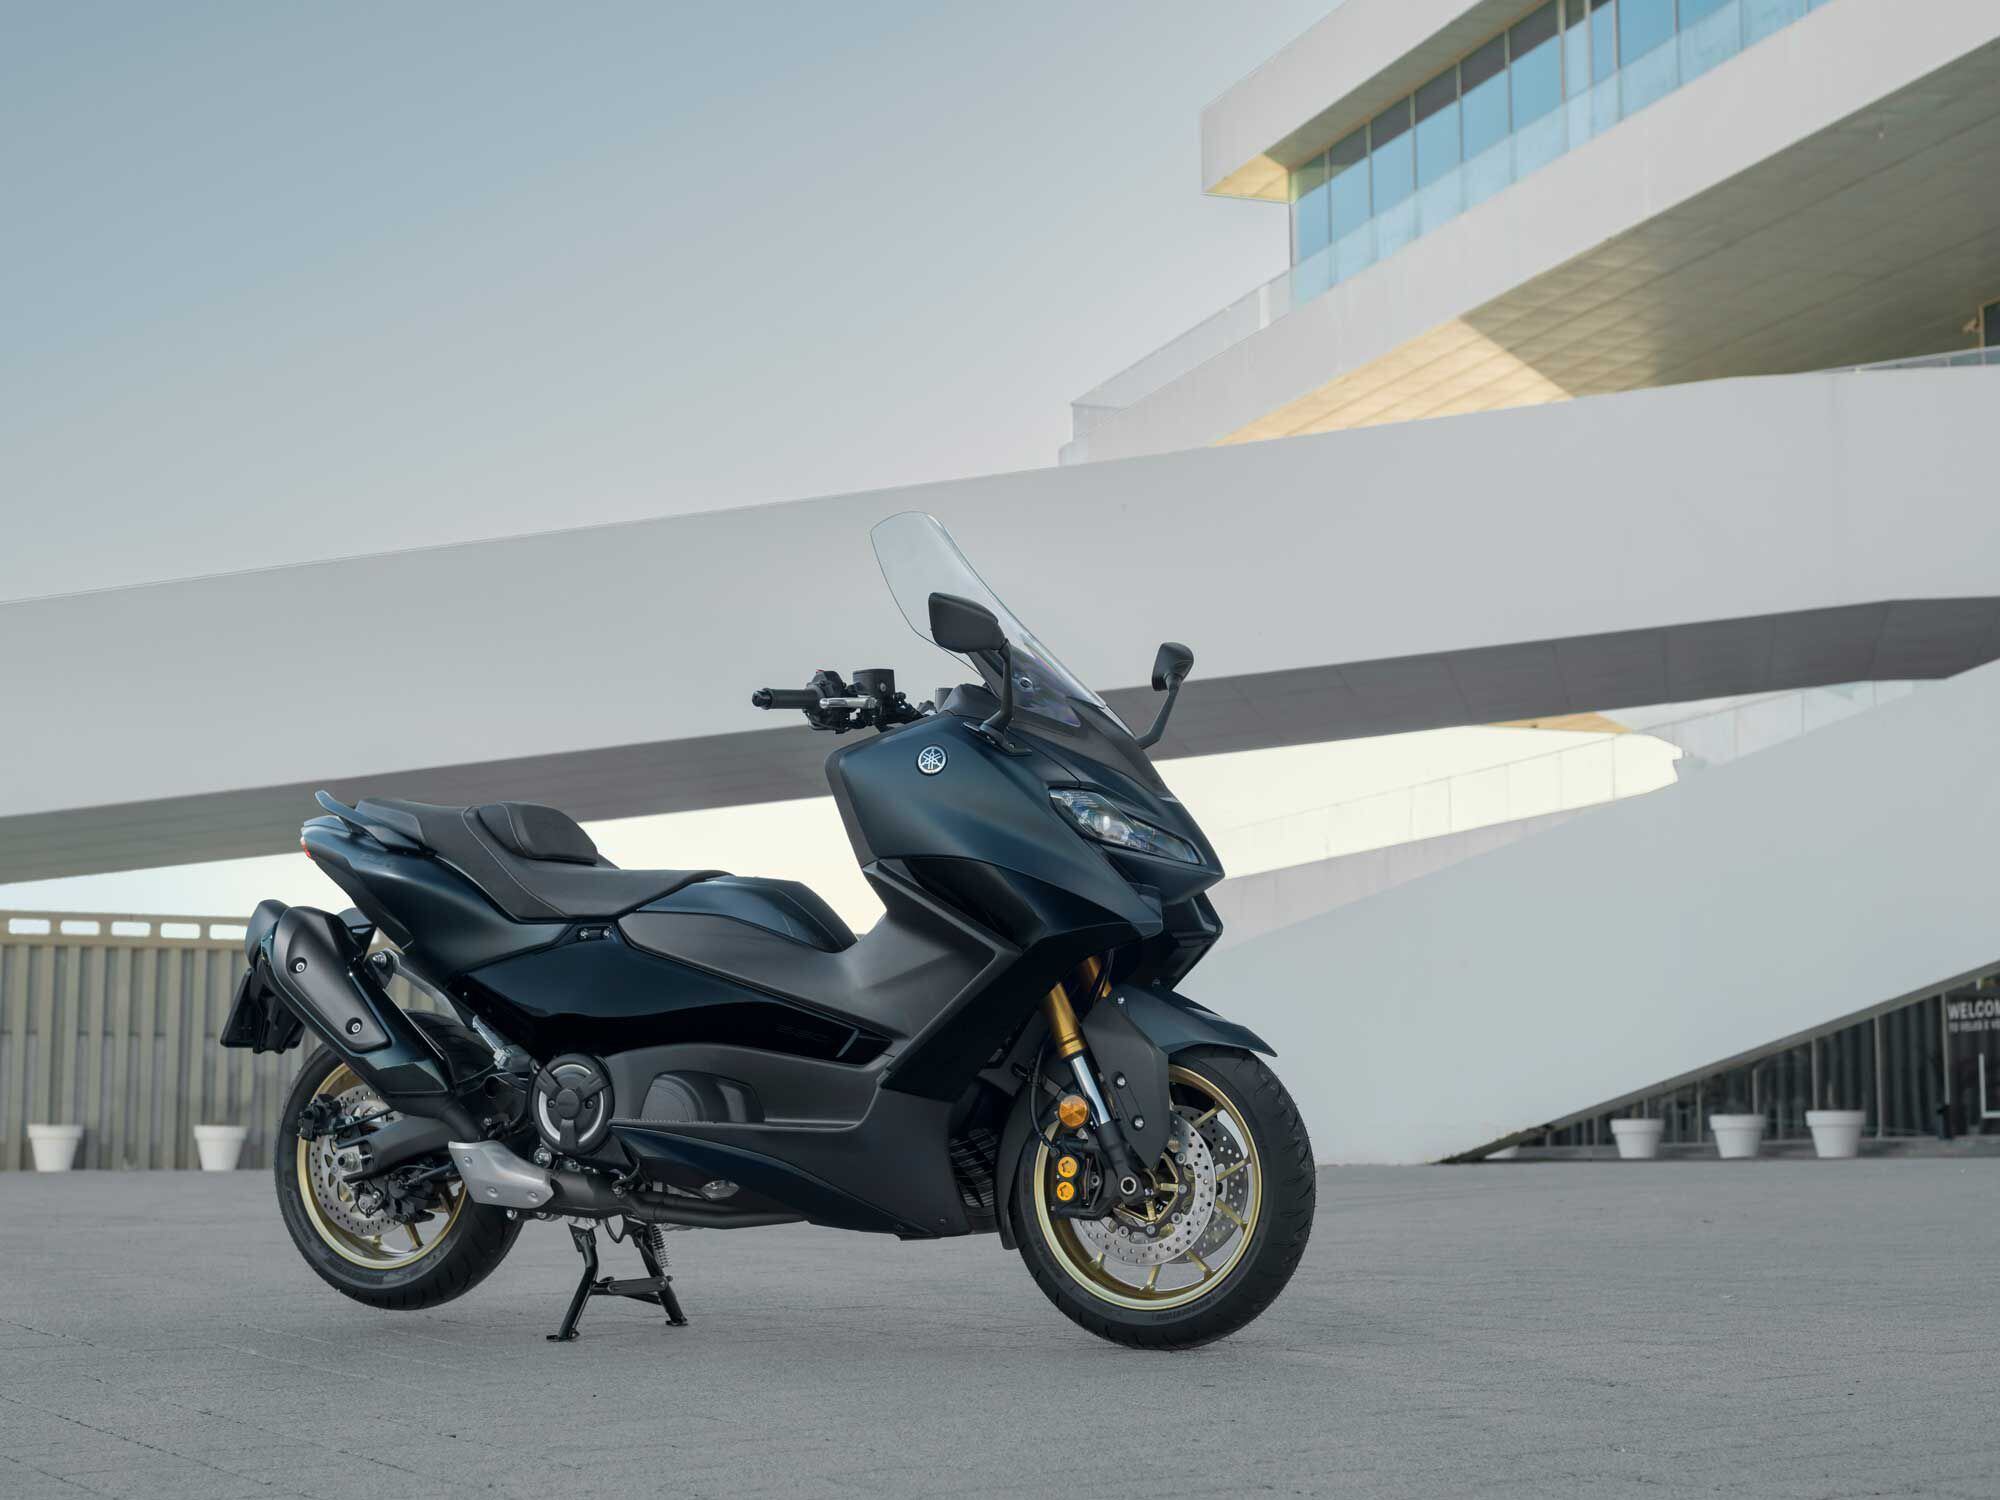 Yamaha offers touring accessories, including a huge top box large enough for two full-face helmets.